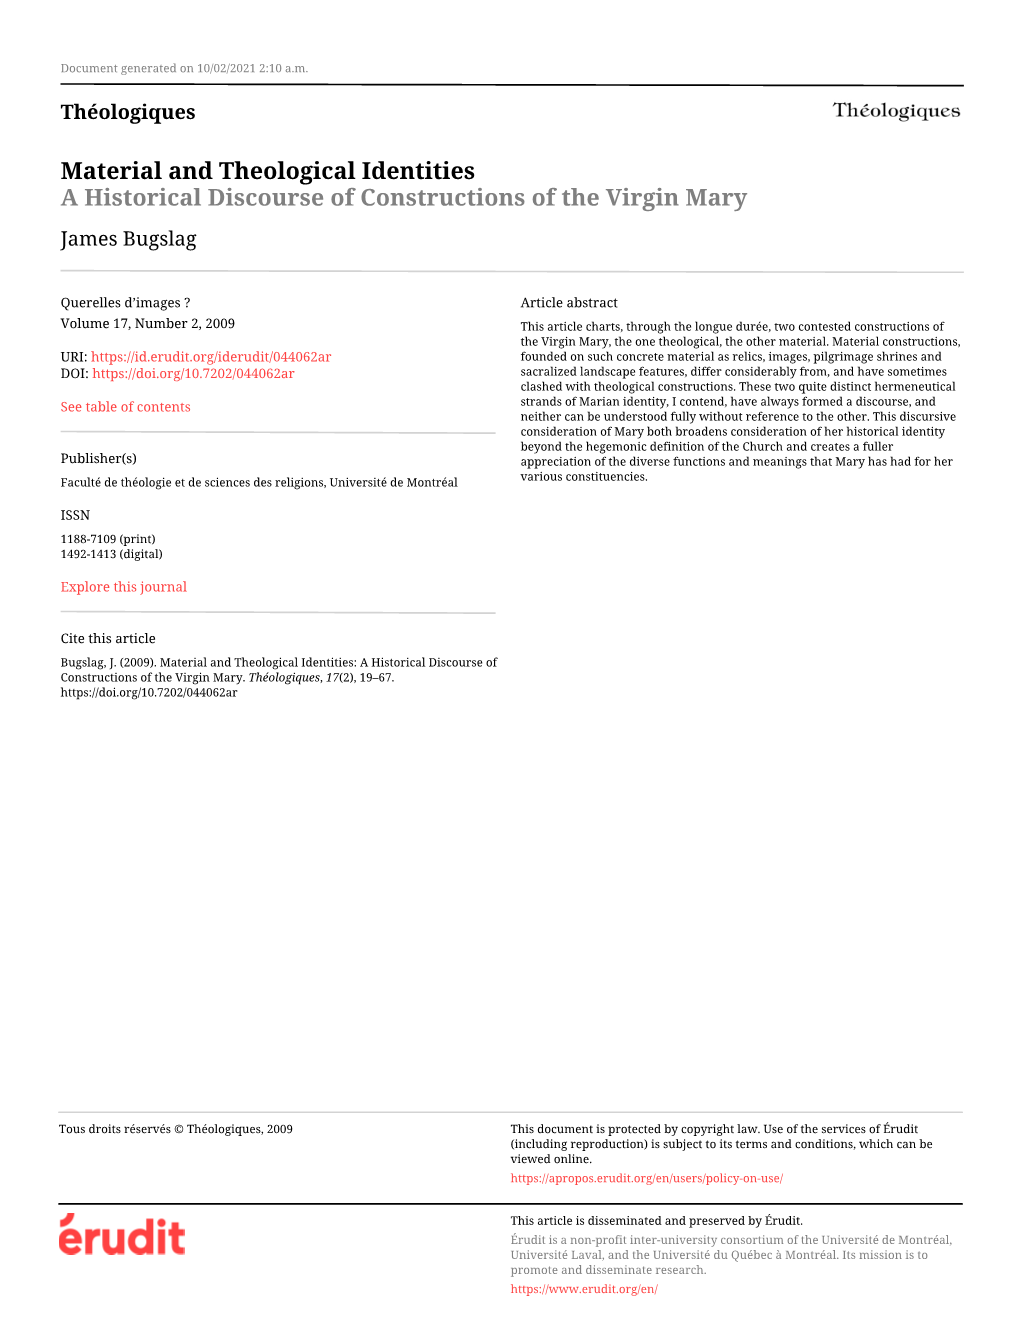 Material and Theological Identities: a Historical Discourse of Constructions of the Virgin Mary